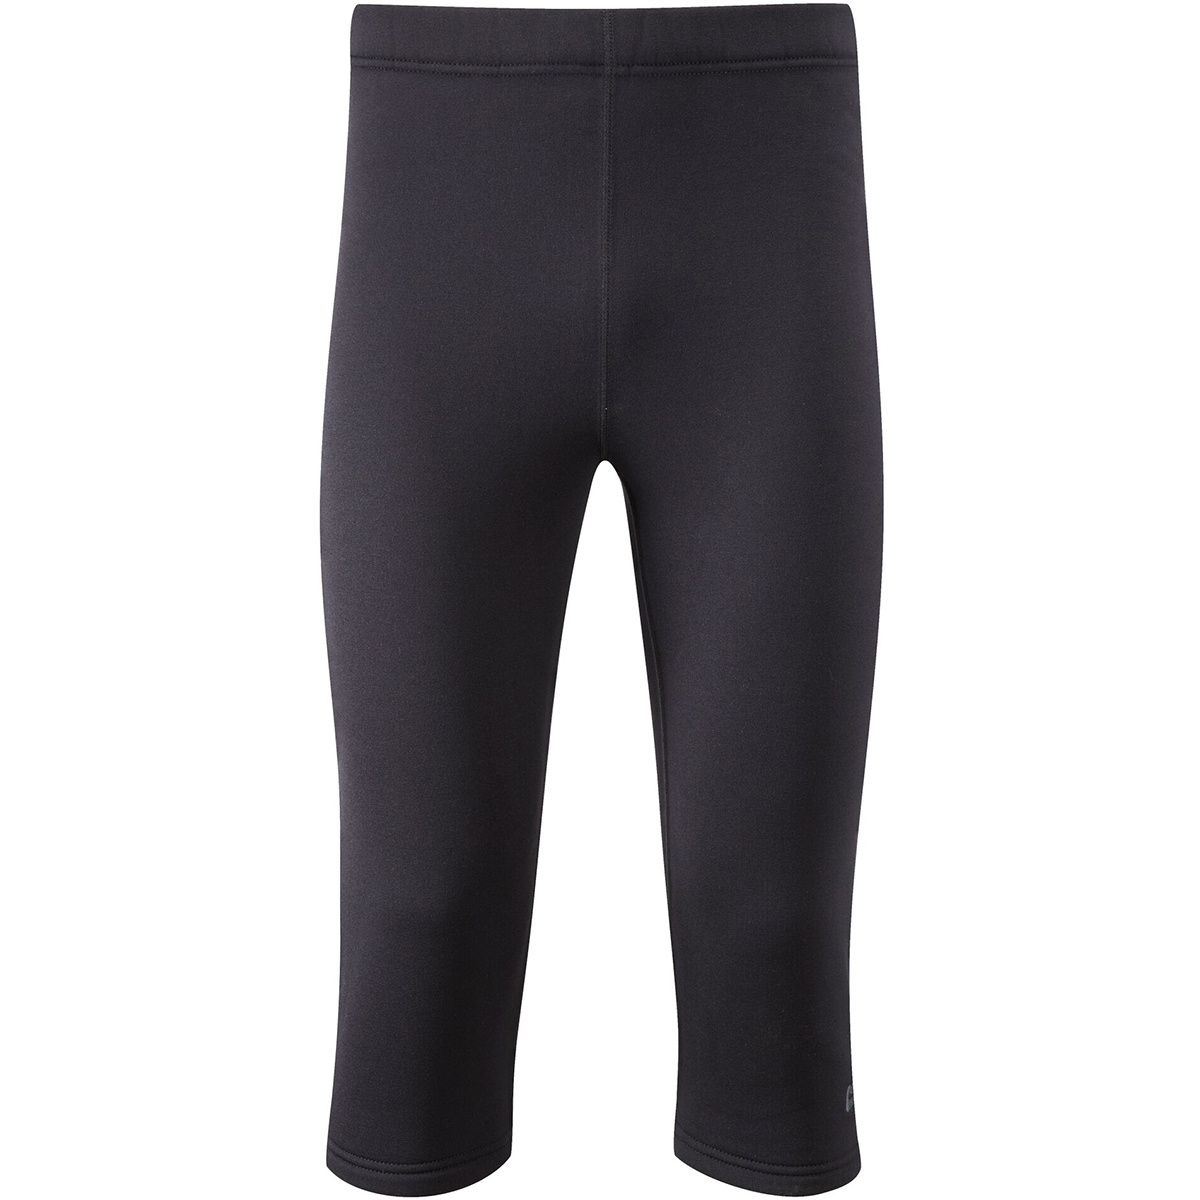 Image of Mountain Equipment Donna Leggings Powerstretch 3/4